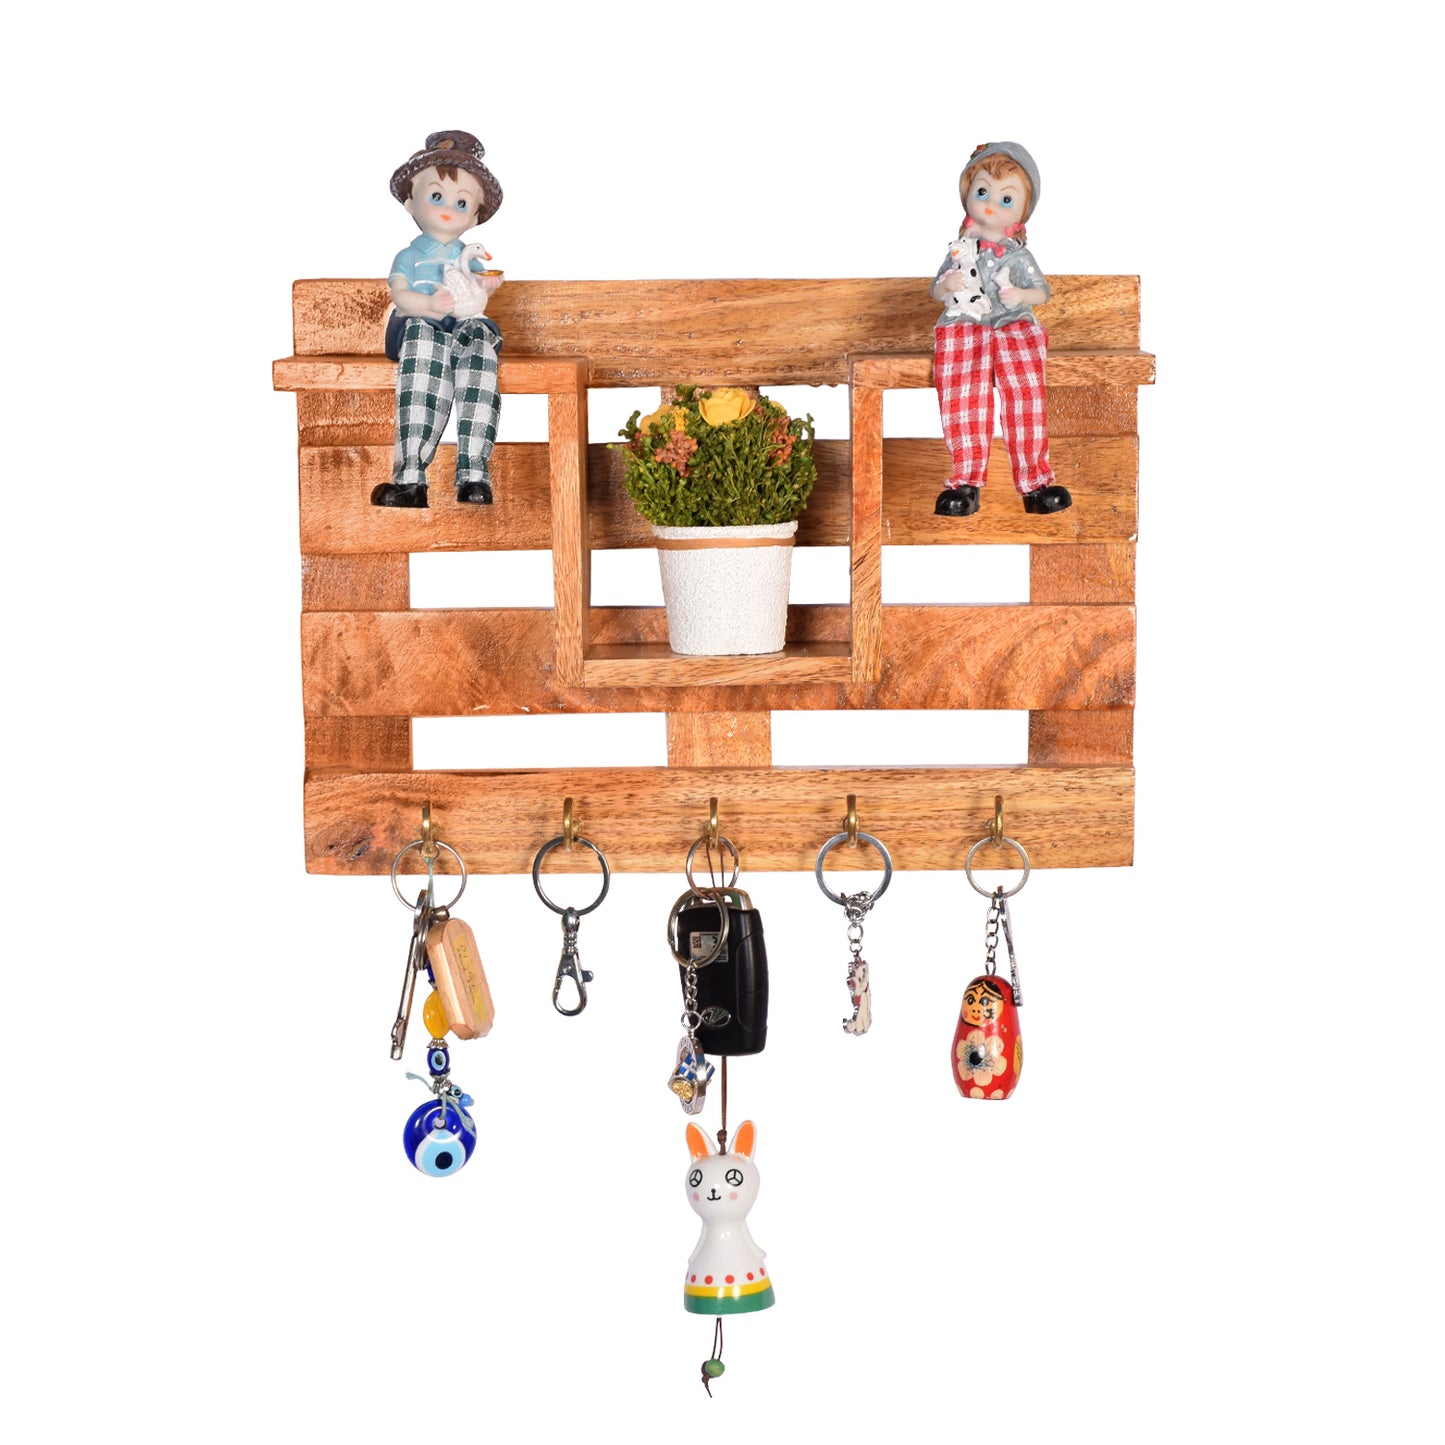 The Weaver's Nest Wooden Wall Mounted Key Holder and Organizer with Shelf for Home, Office, Kitchen, Living Room- Decorative Key Chain Stand